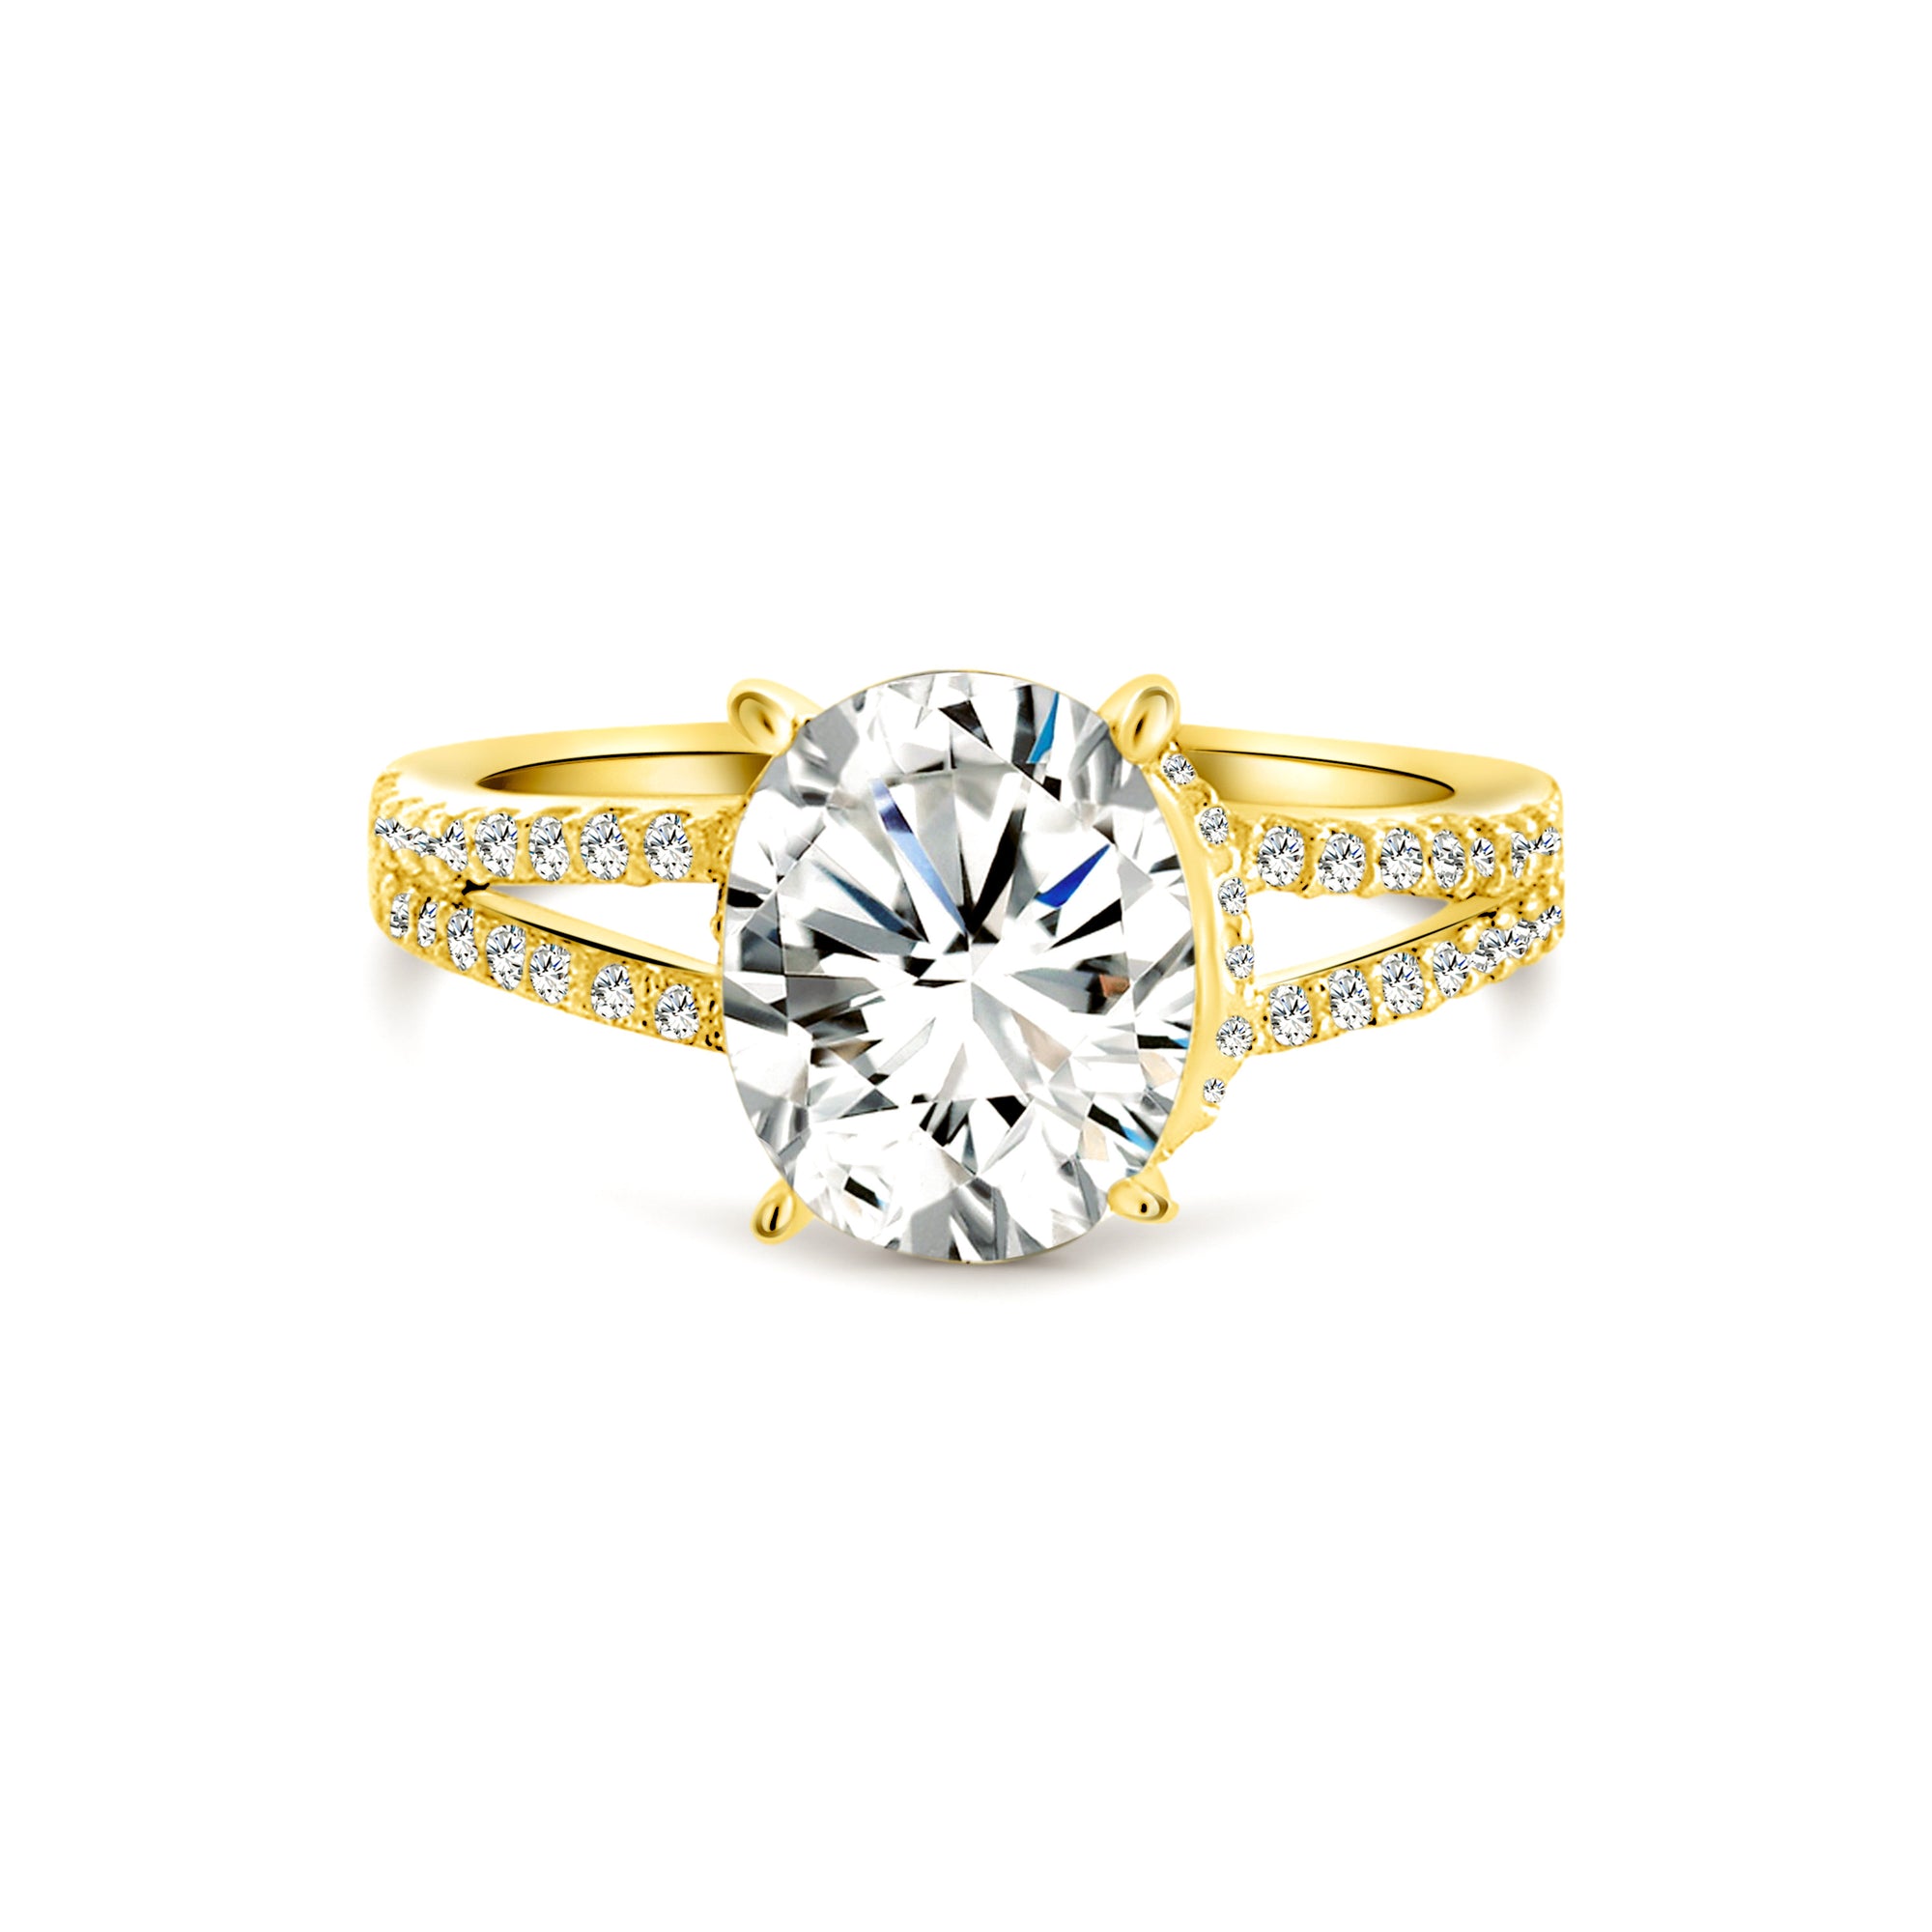 Round Gold Ring Sterling Silver 925 CZ